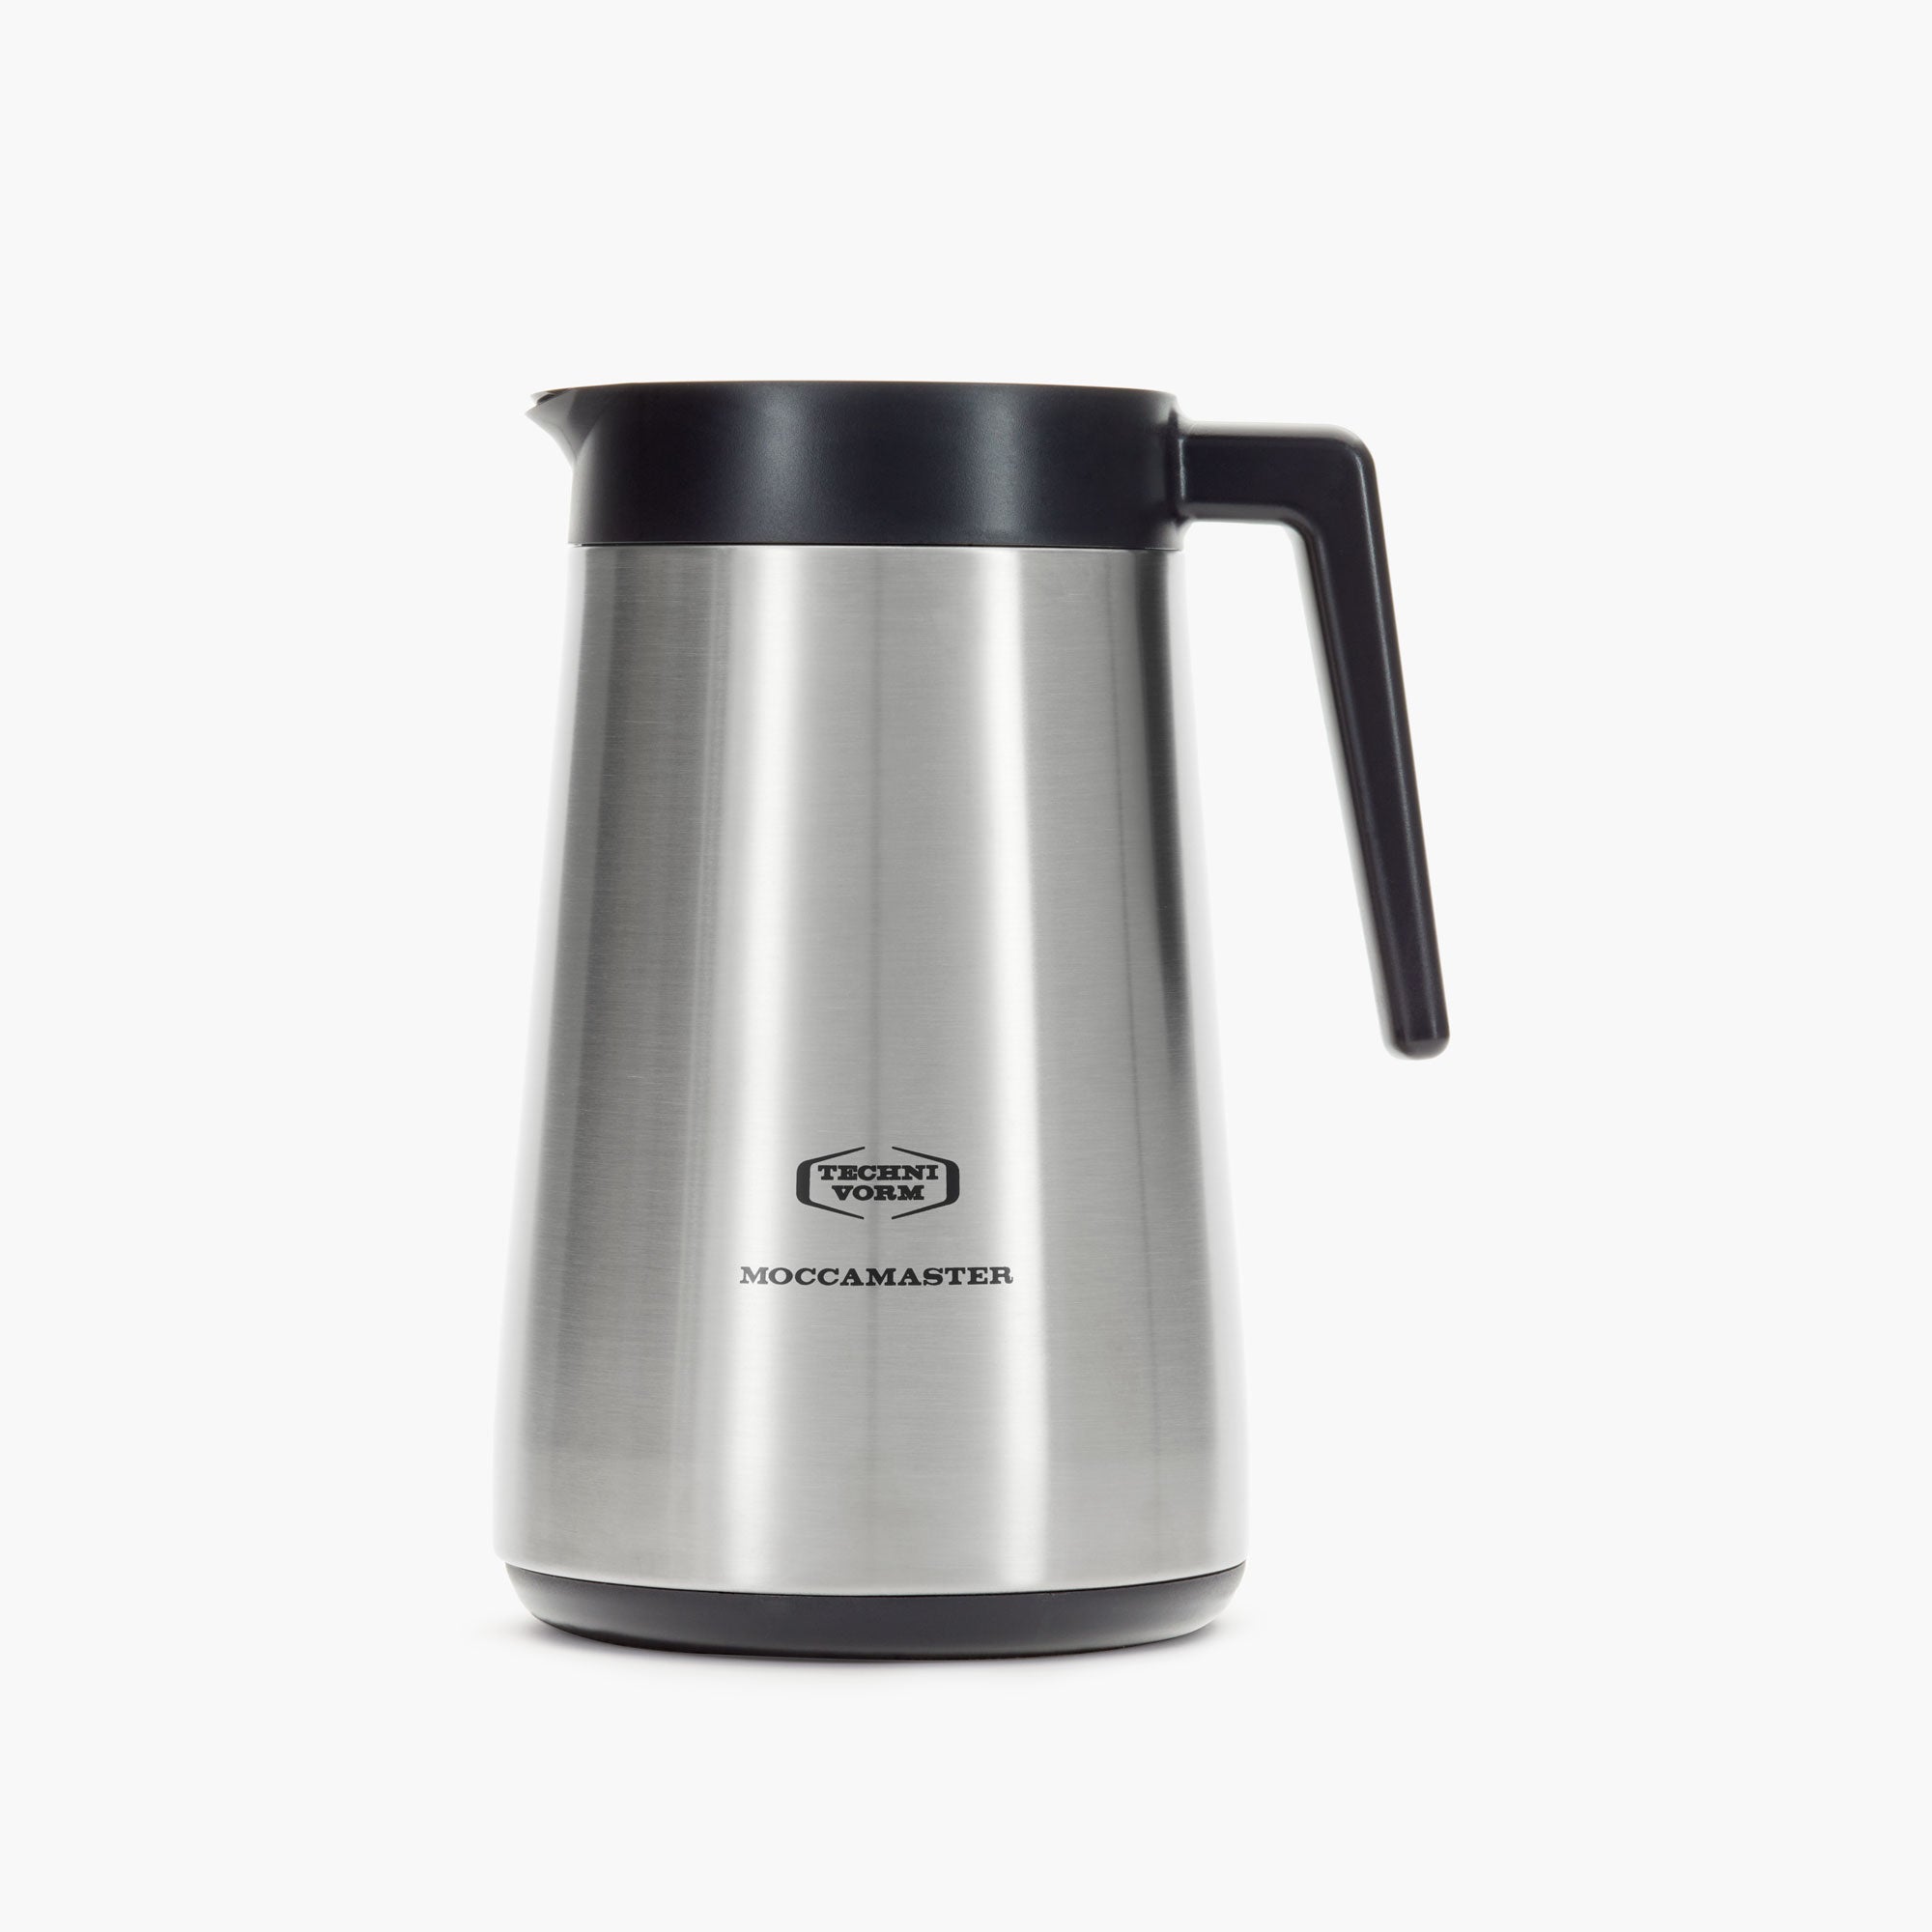 Best Glass Lined Thermos of 2023 [Updated] 